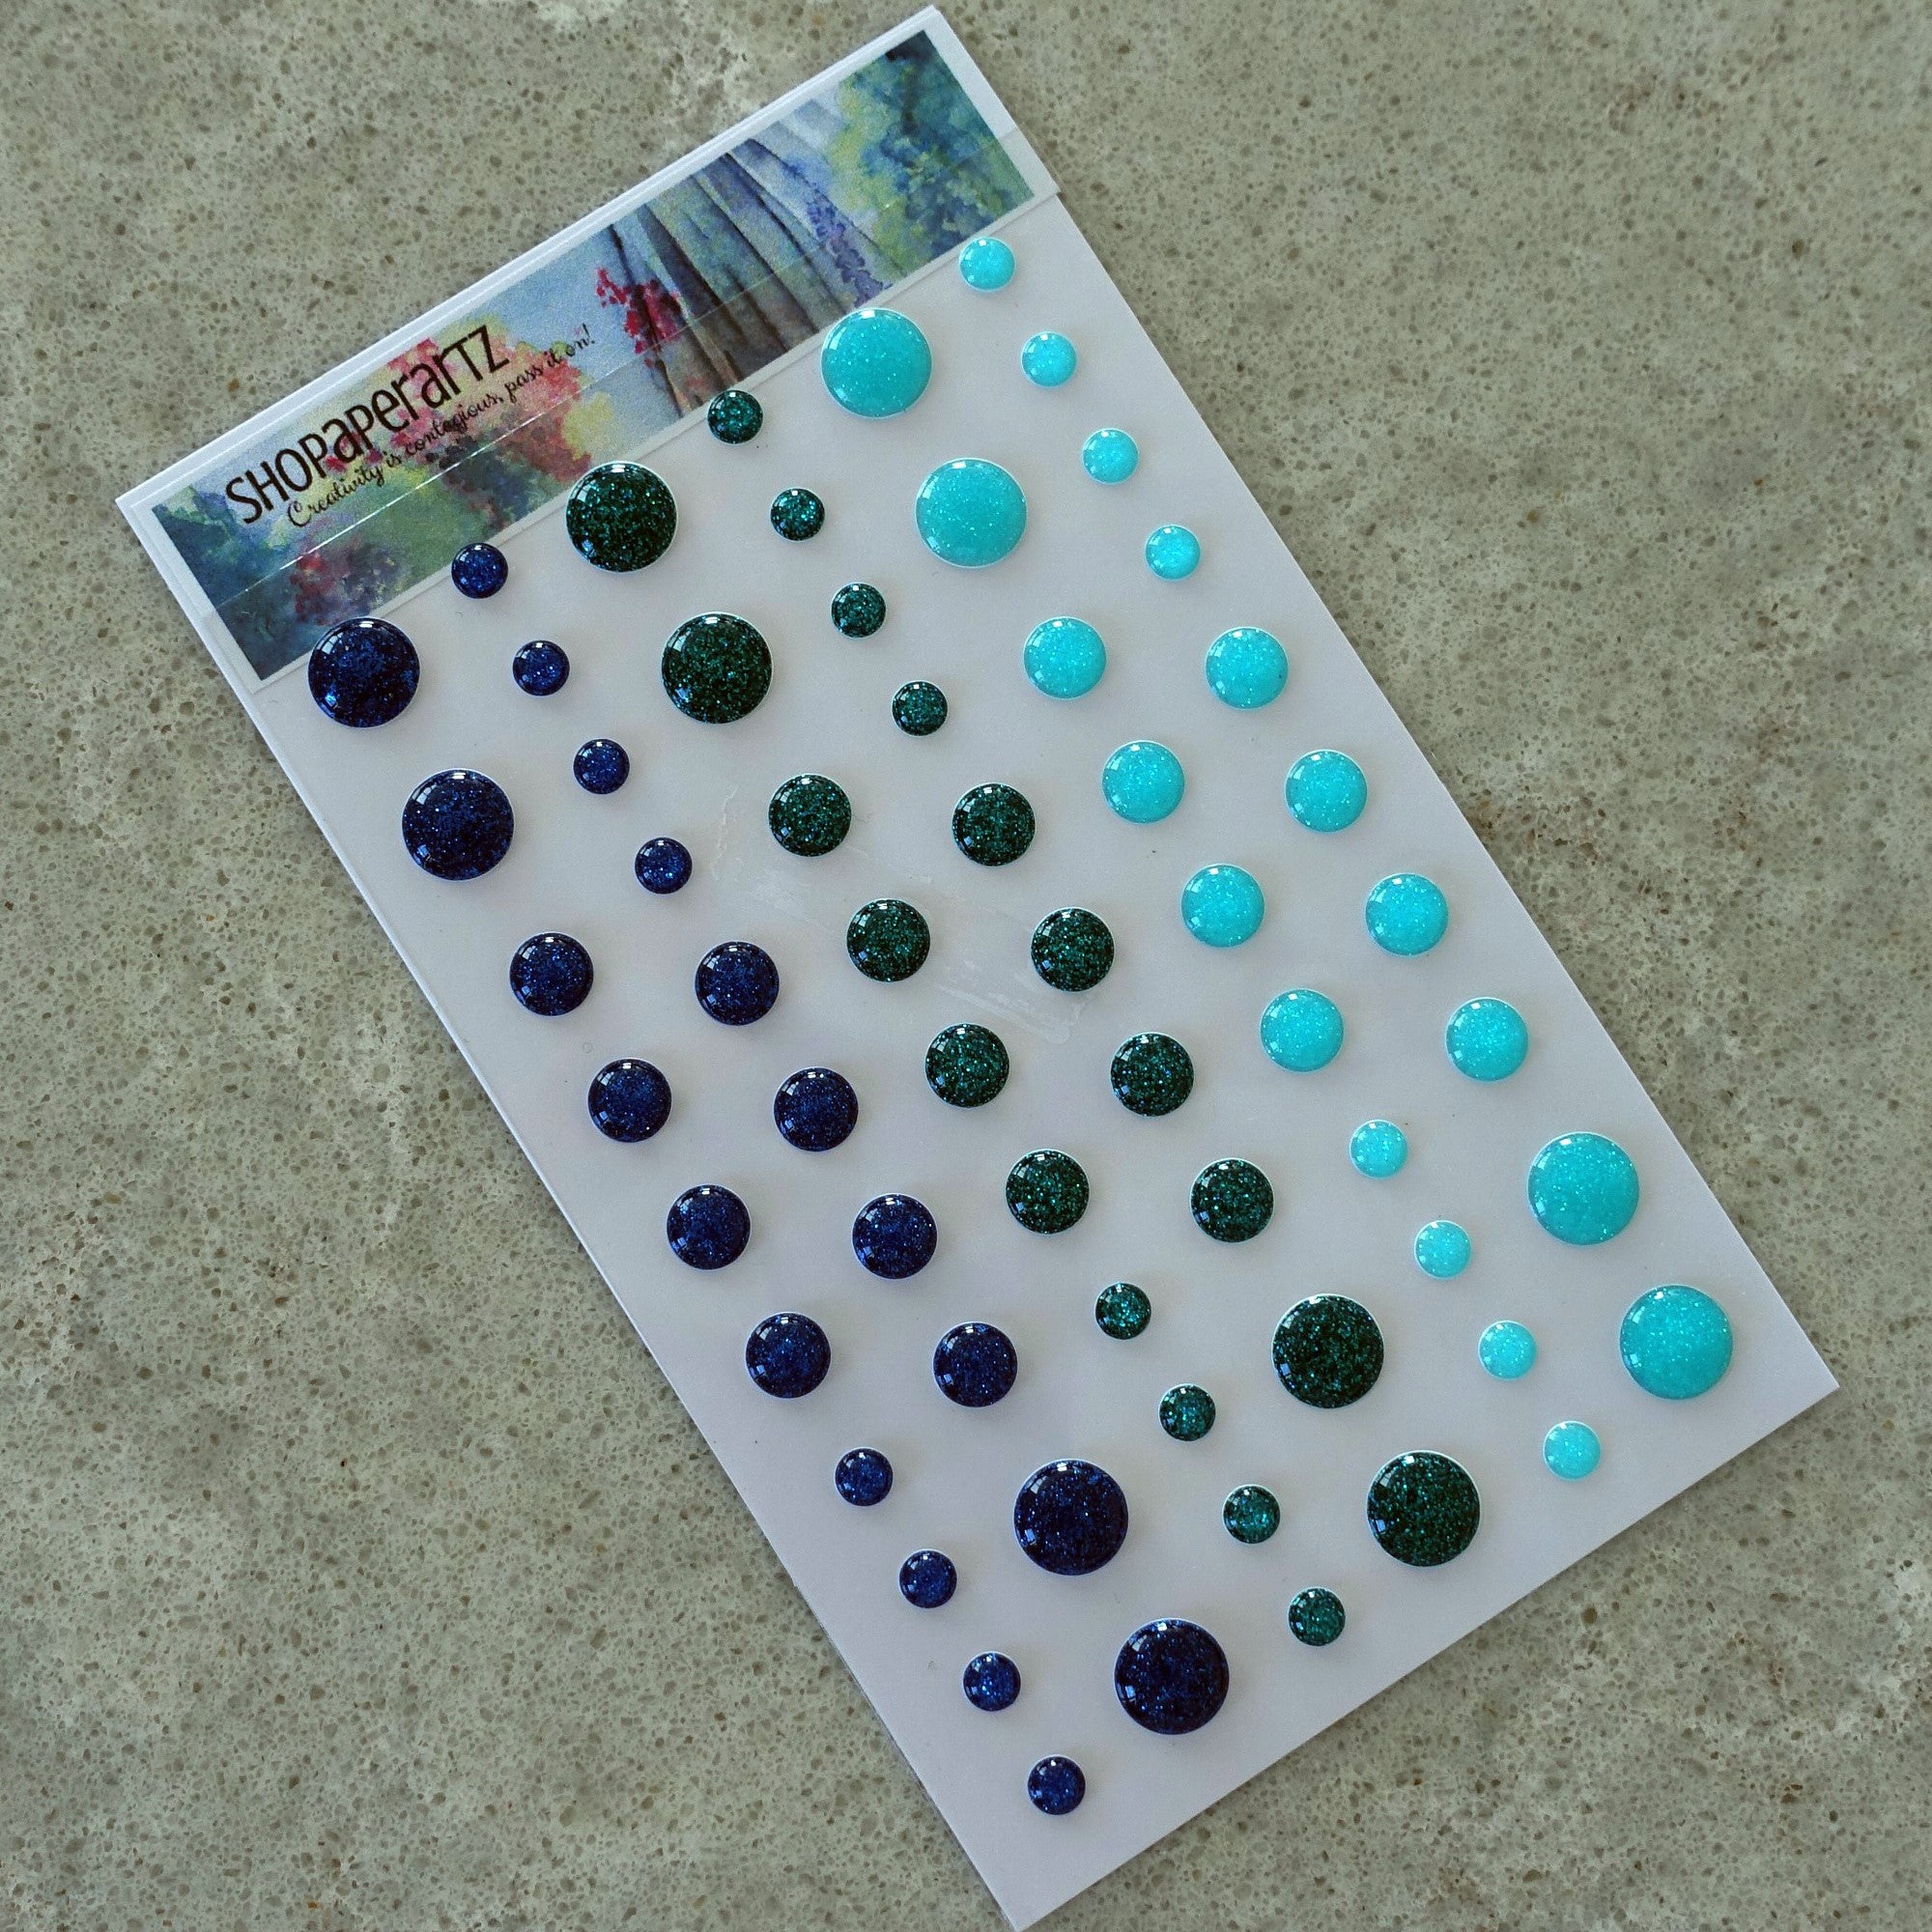 GLITTER ENAMEL DOTS SHADES OF TEAL BLUE EMBELLISHMENTS ACCENTS SELF-ADHESIVE 60 PIECES CARDMAKING